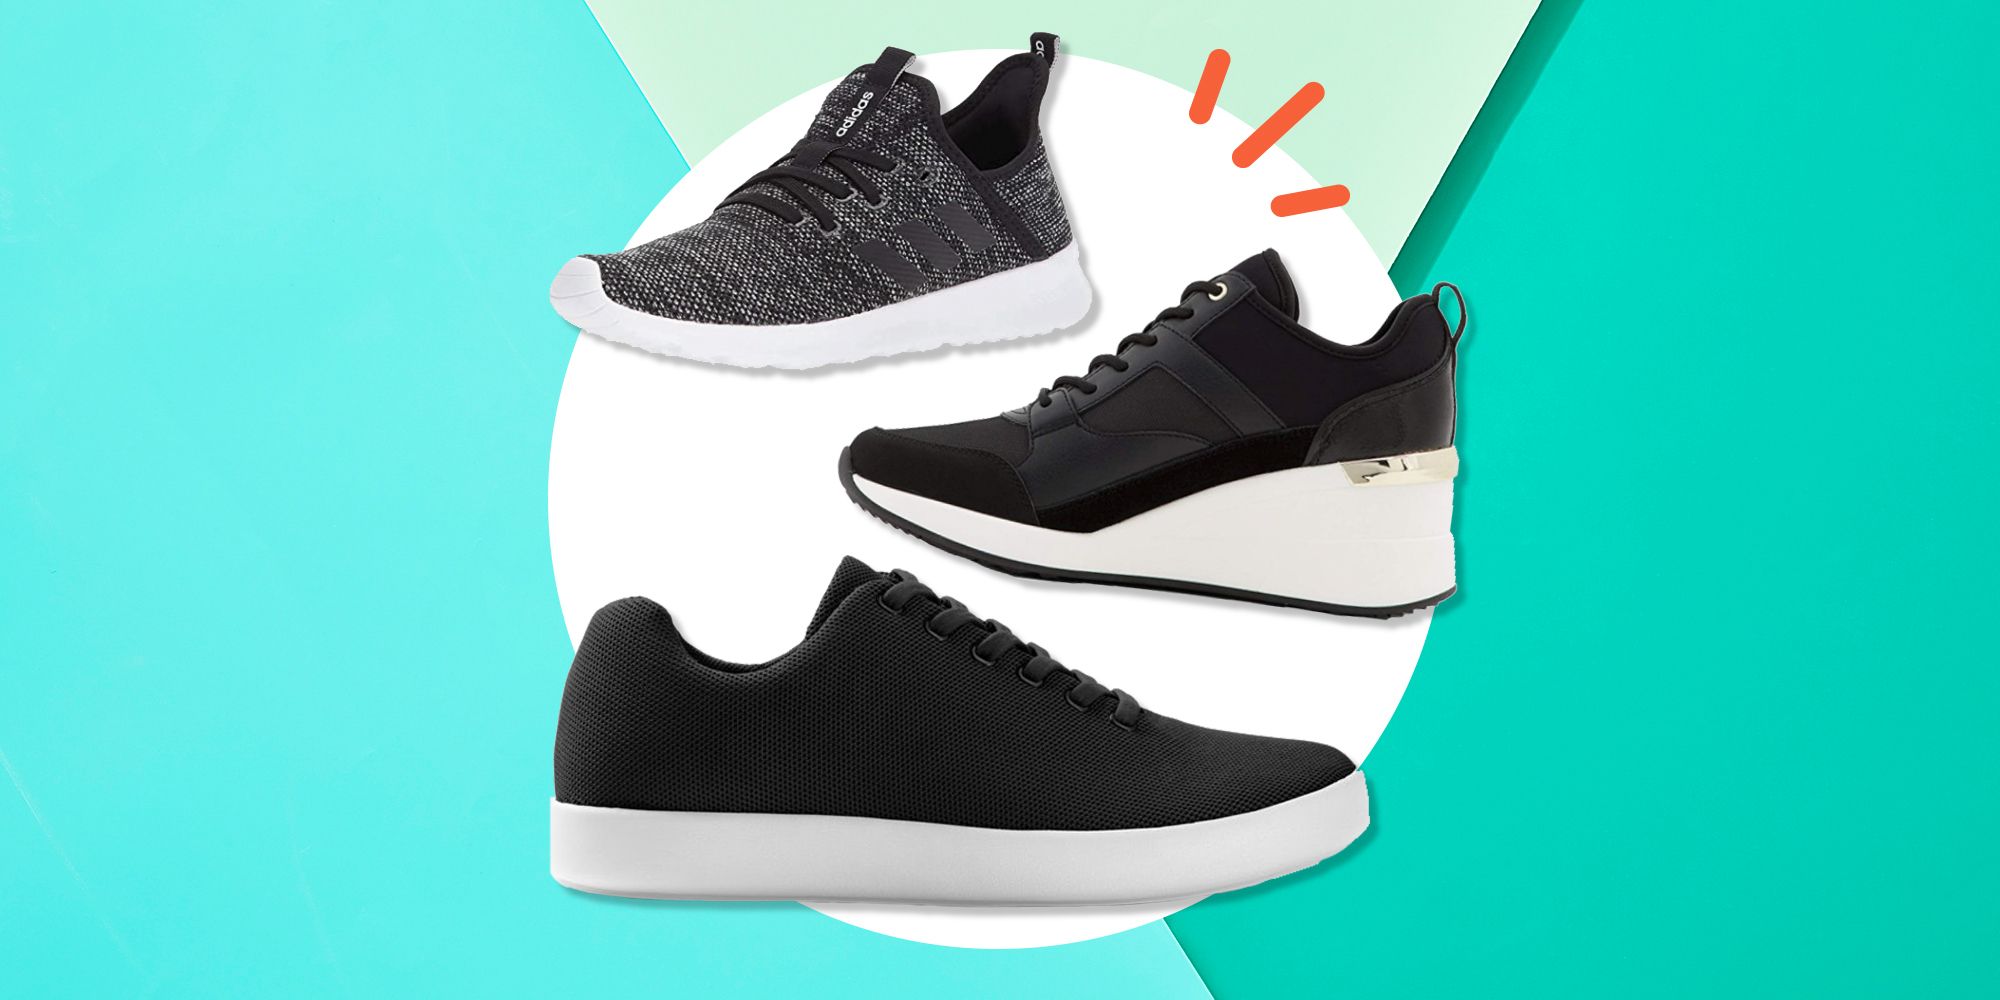 Best Black Sneakers Every Style, Budget, Workout